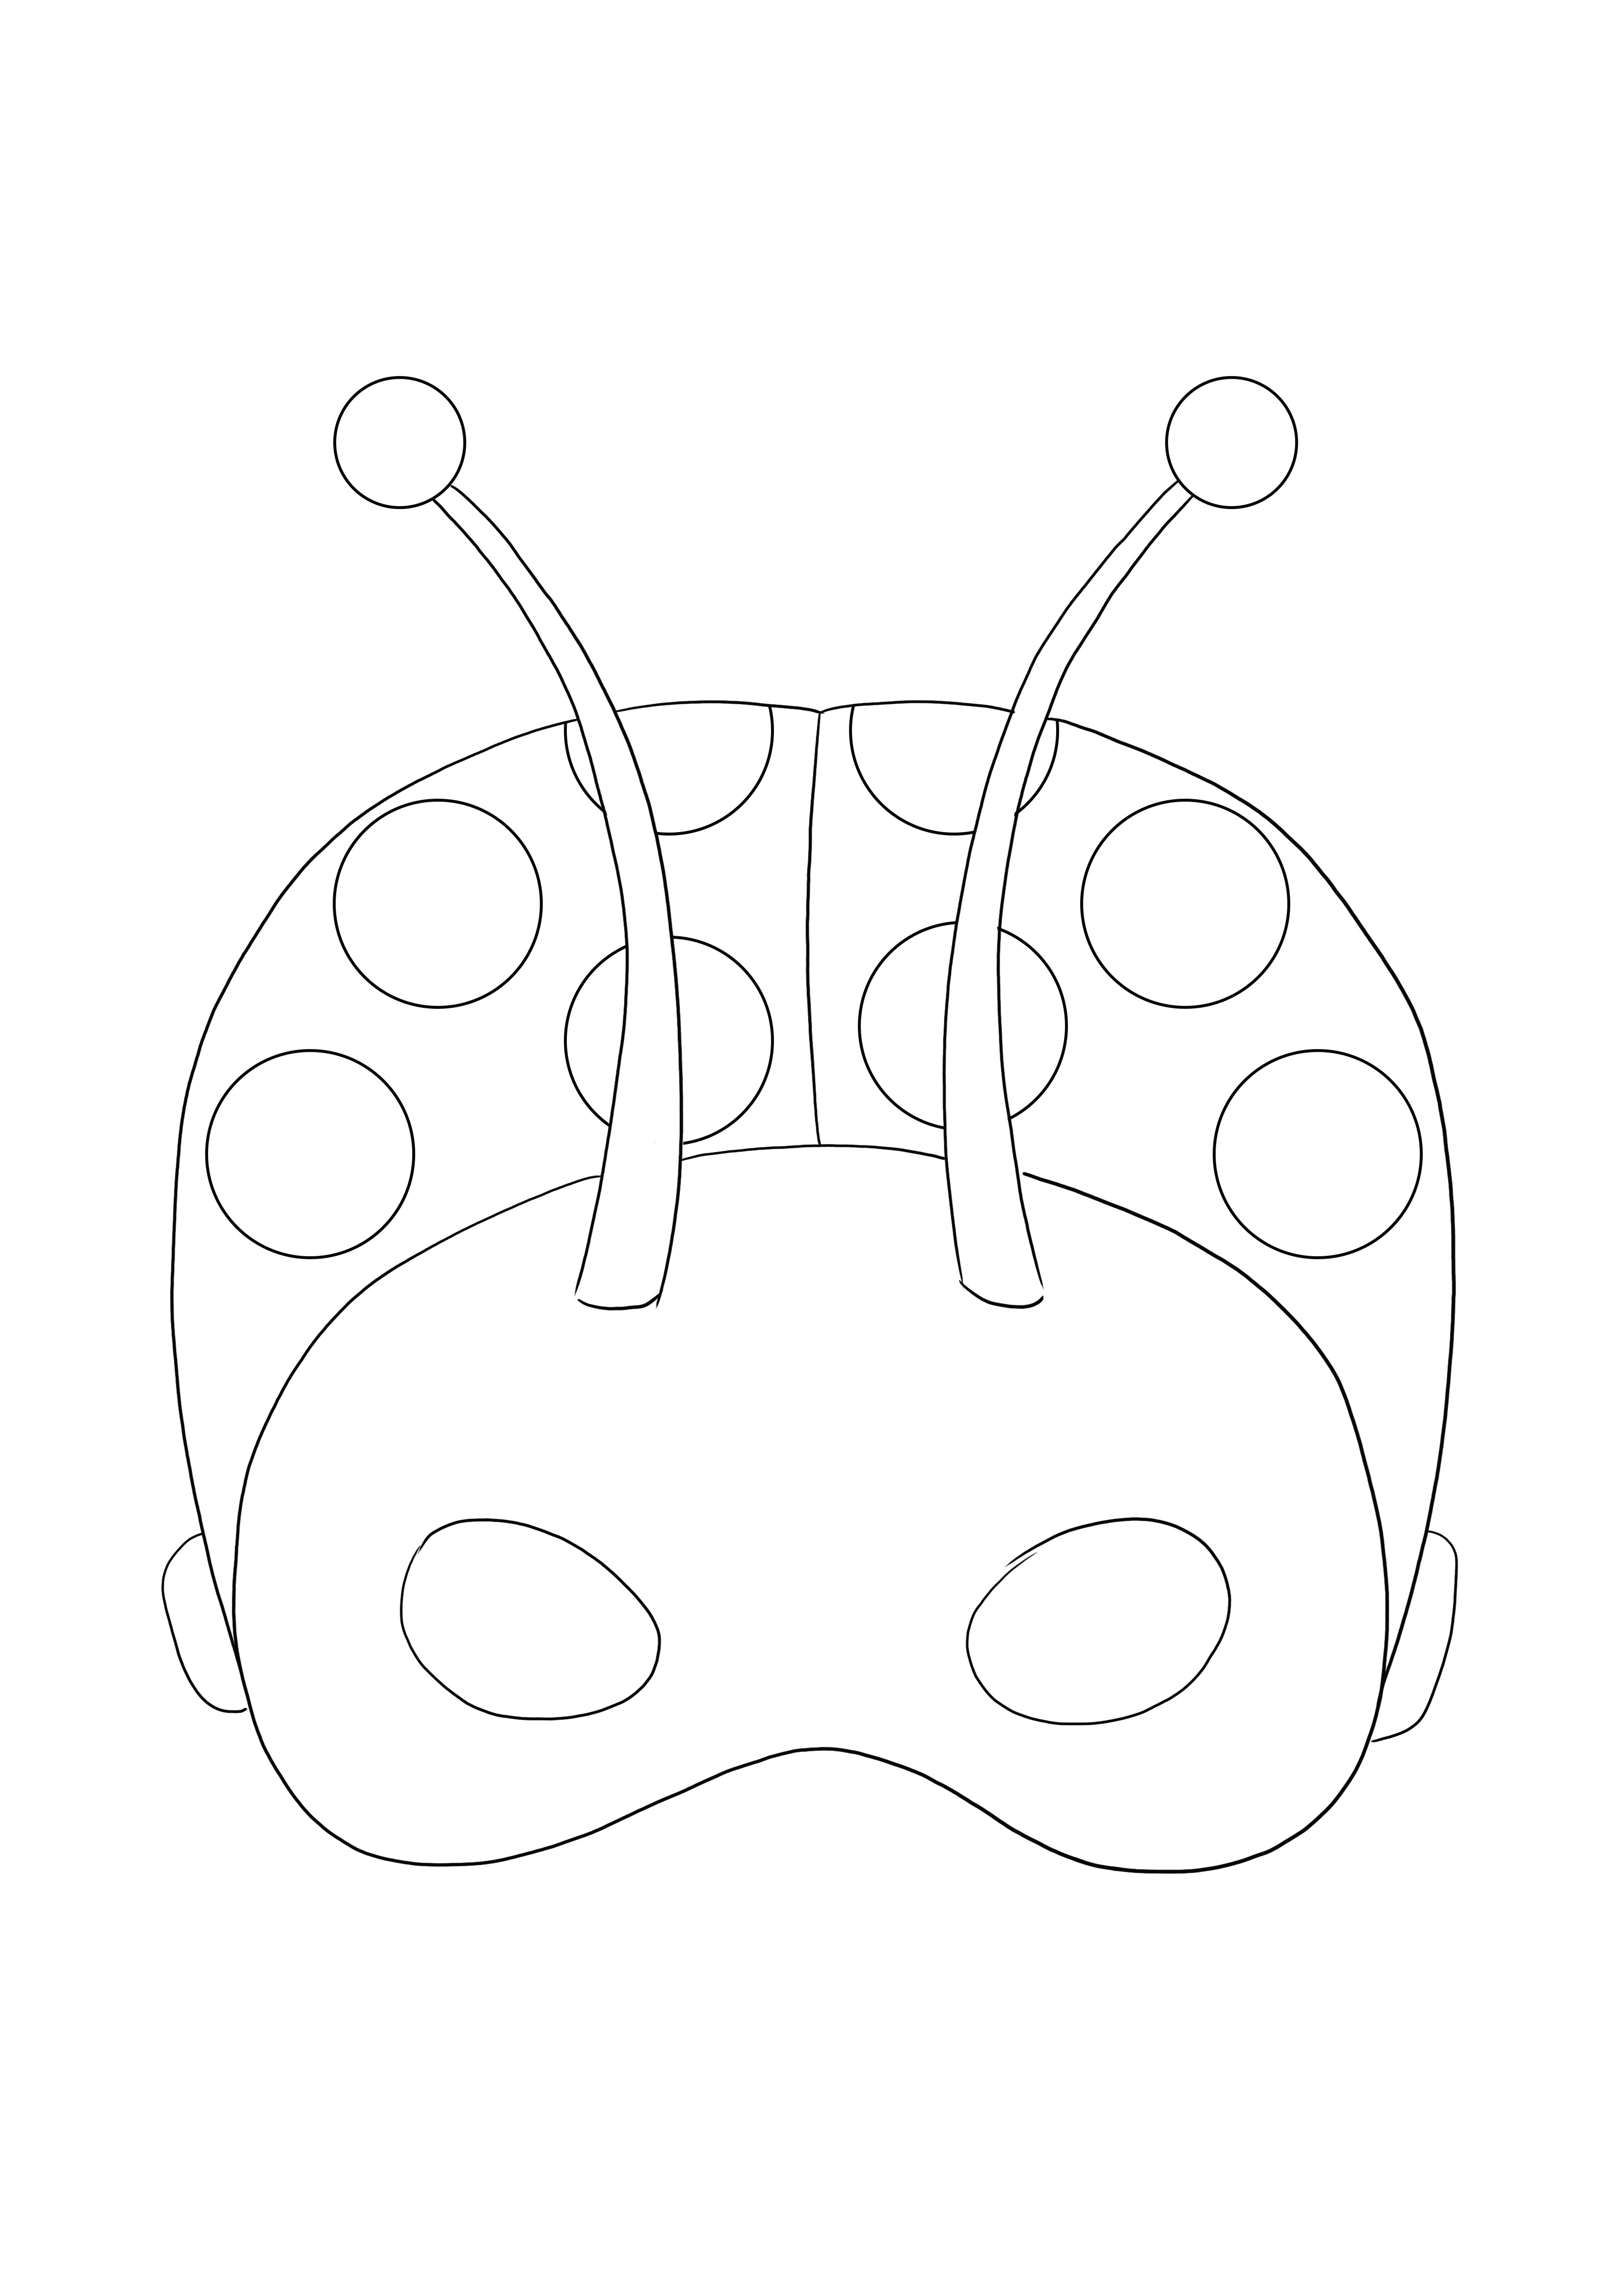 Ladybug Mask coloring page free to download or print and color